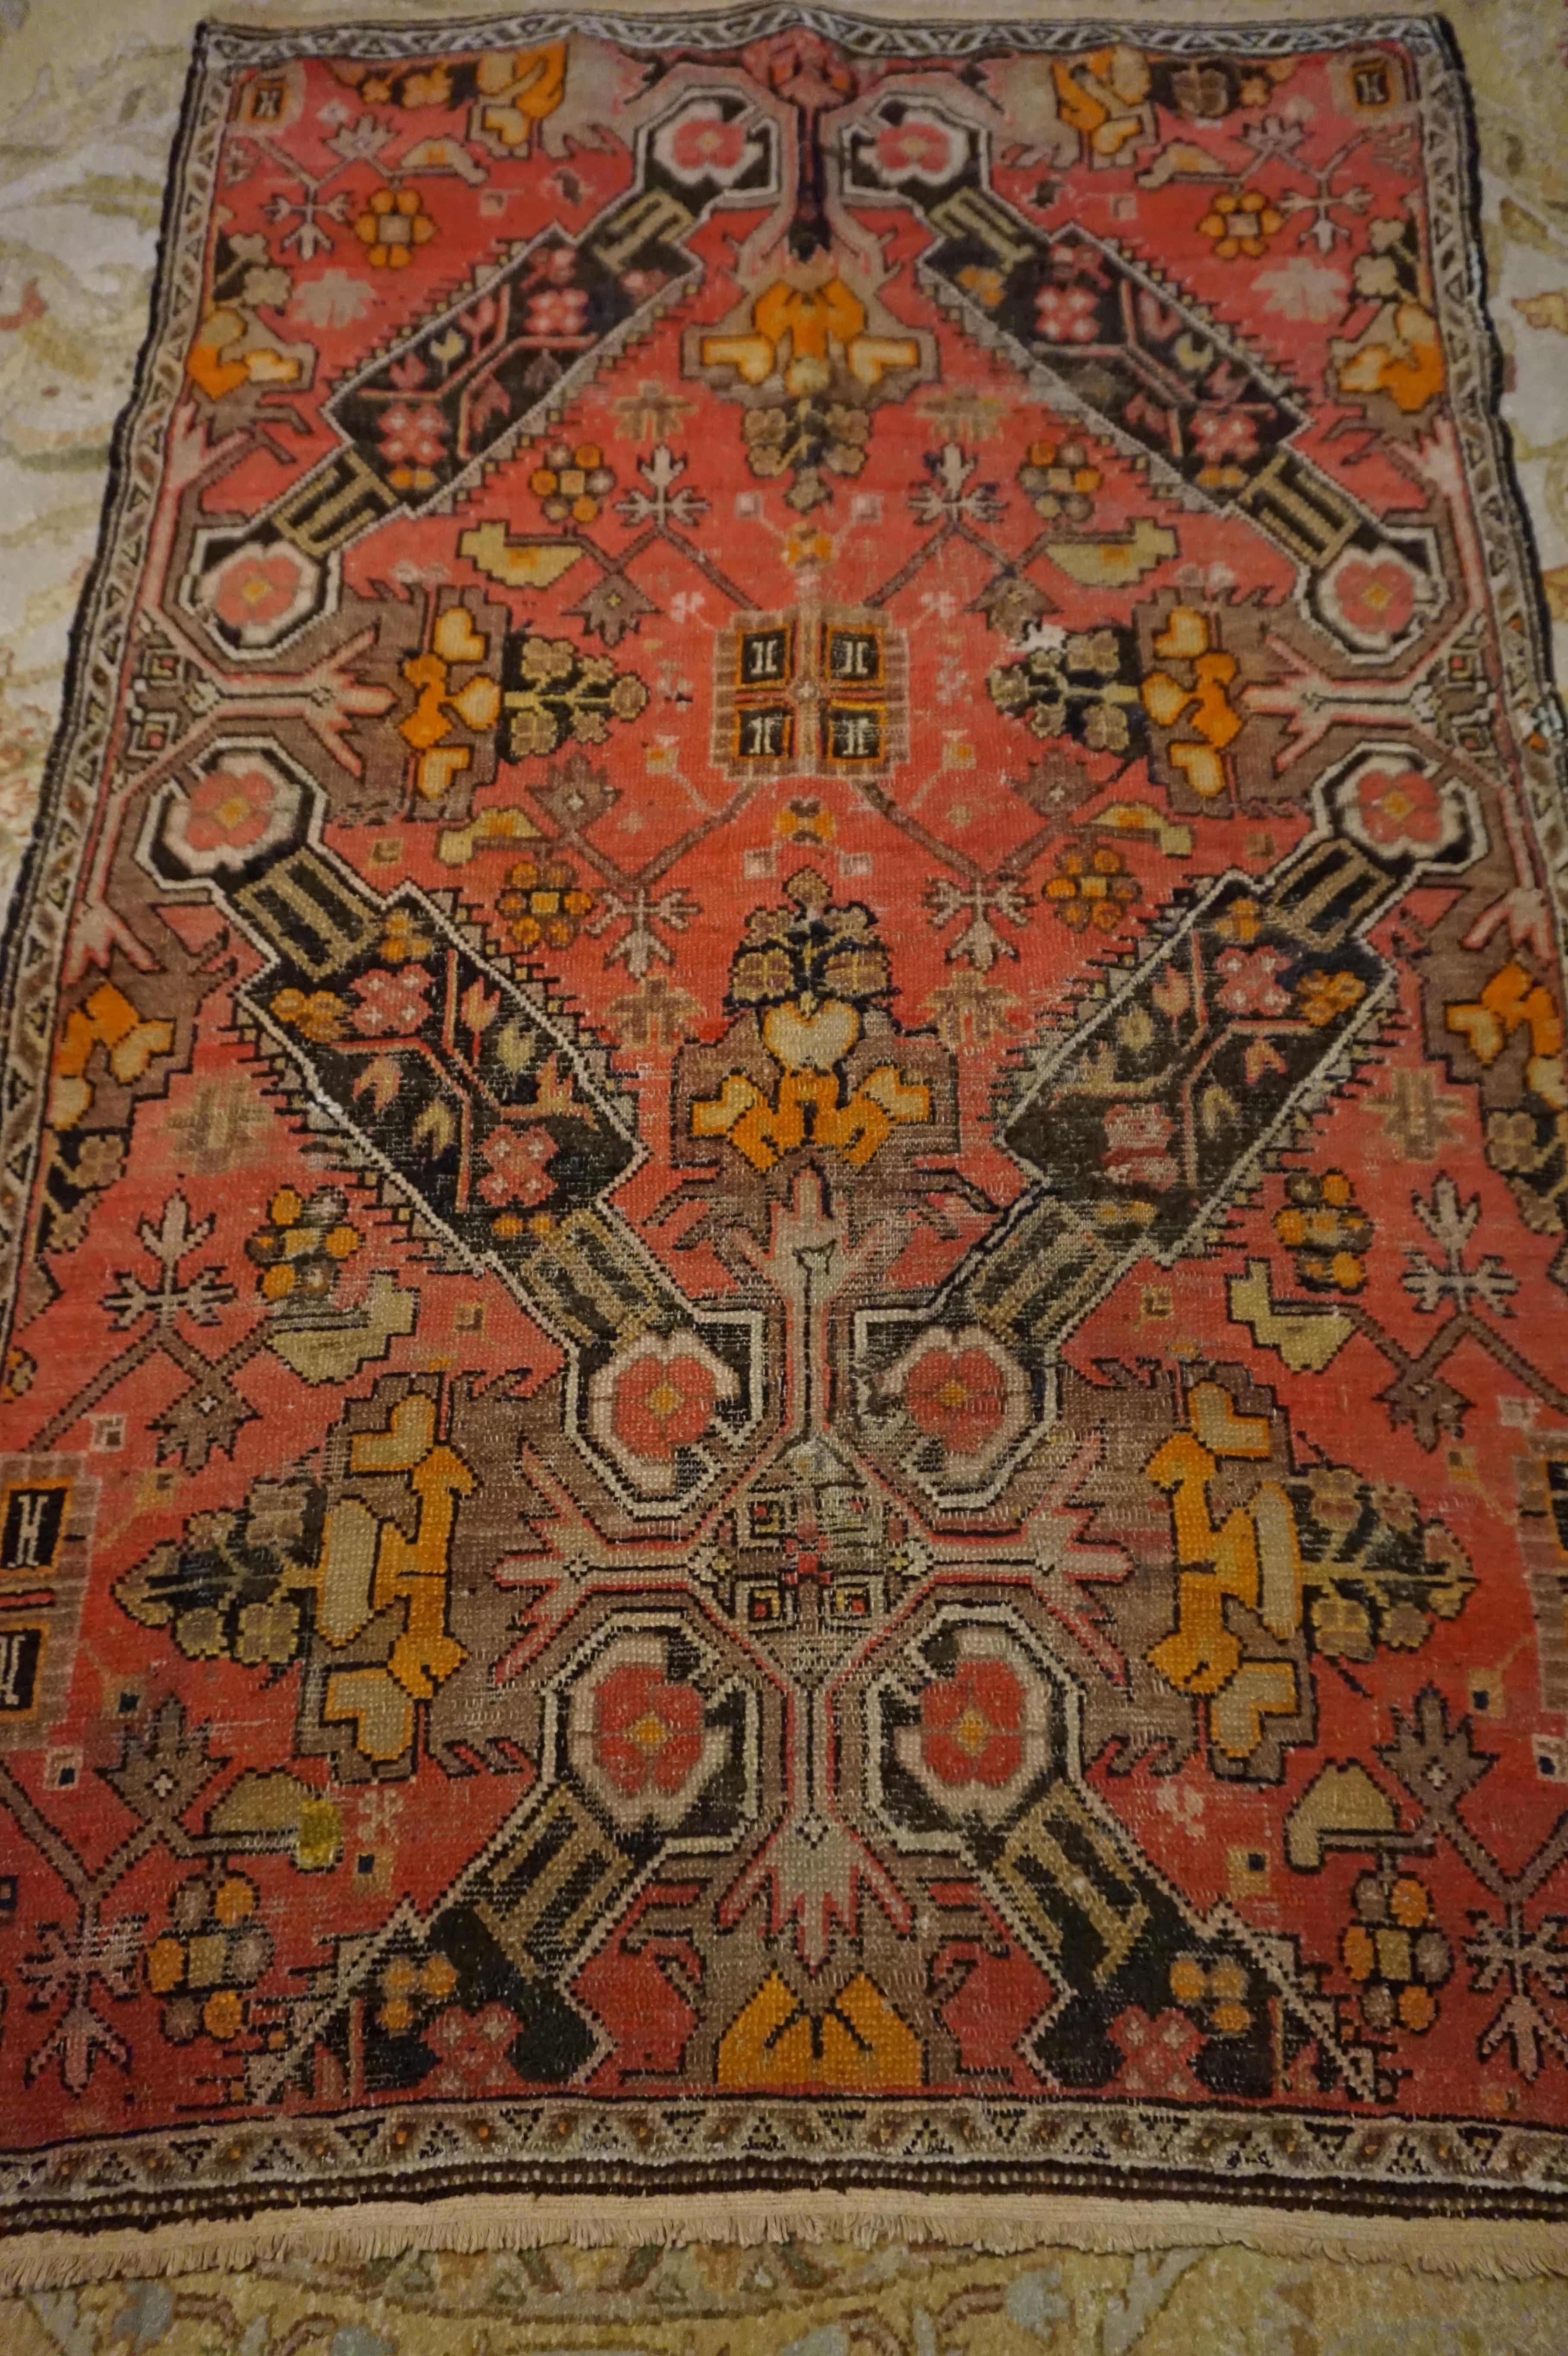 Rare Georgia Caucasus Rug in salmon and pink tones with kite shaped medallions encasing a floral geometric theme. Overall condition is time honoured but with lots of life to offer. Well conceived pattern oozing with warmth and rustic charm. Compact